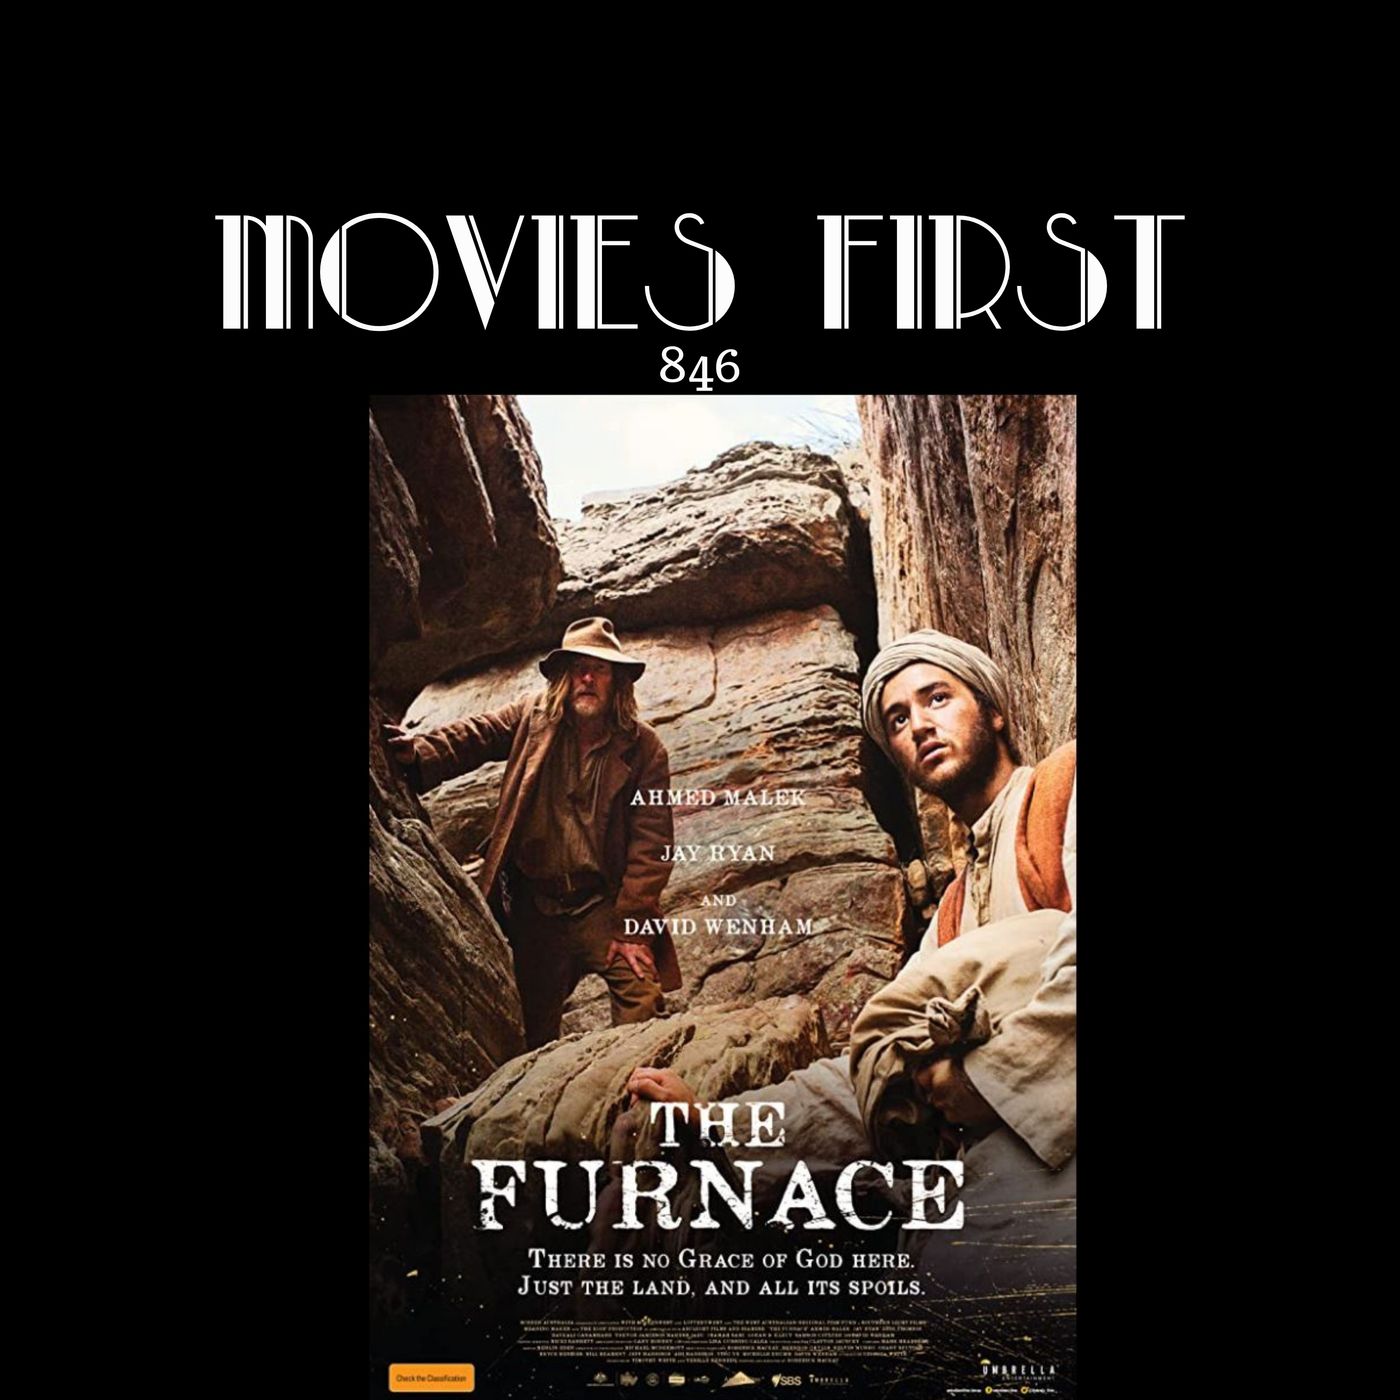 The Furnace (Adventure, Drama, History) (the @MoviesFirst review)